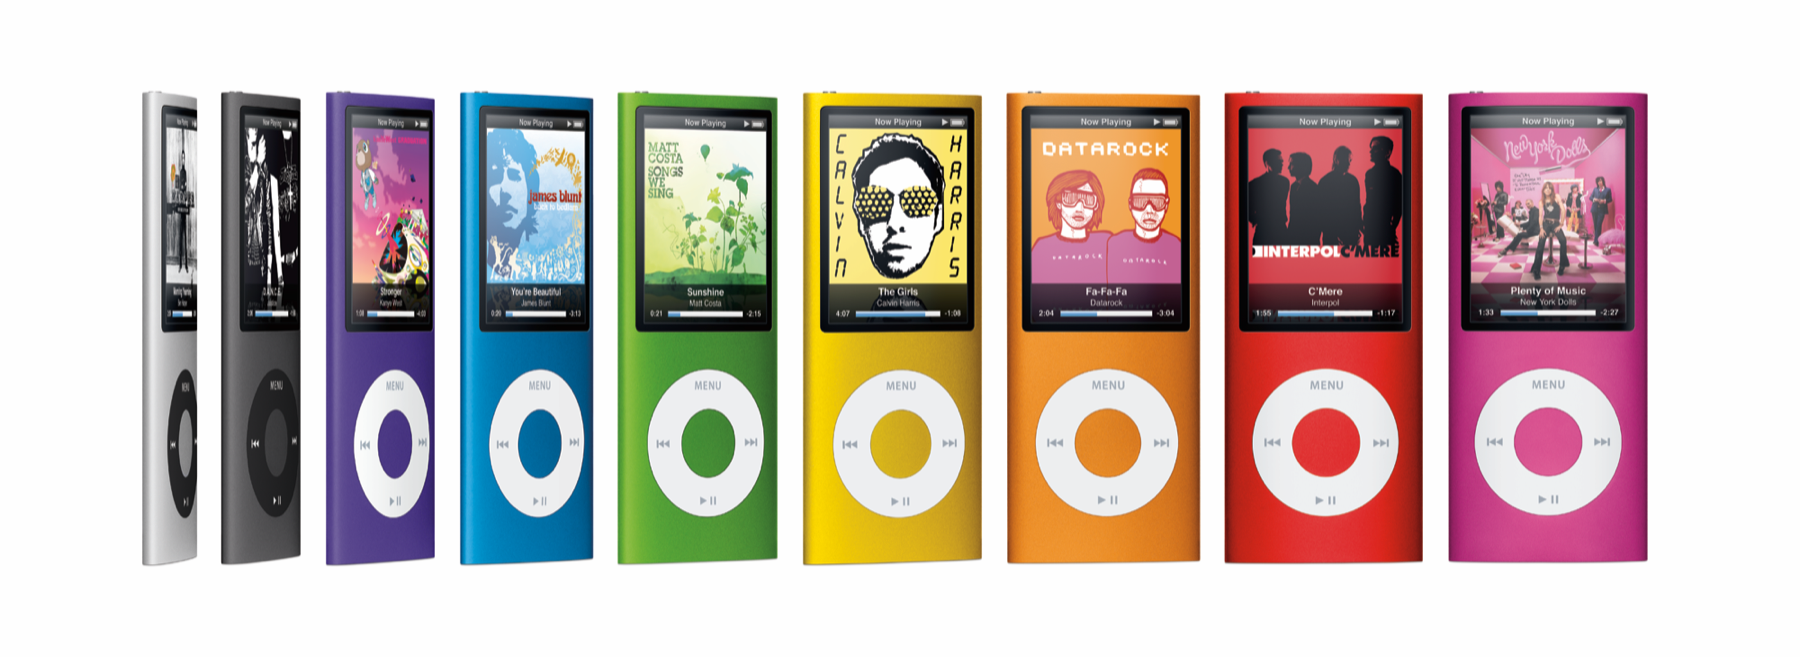 The iPod nano had a weird, amazing history - The Verge